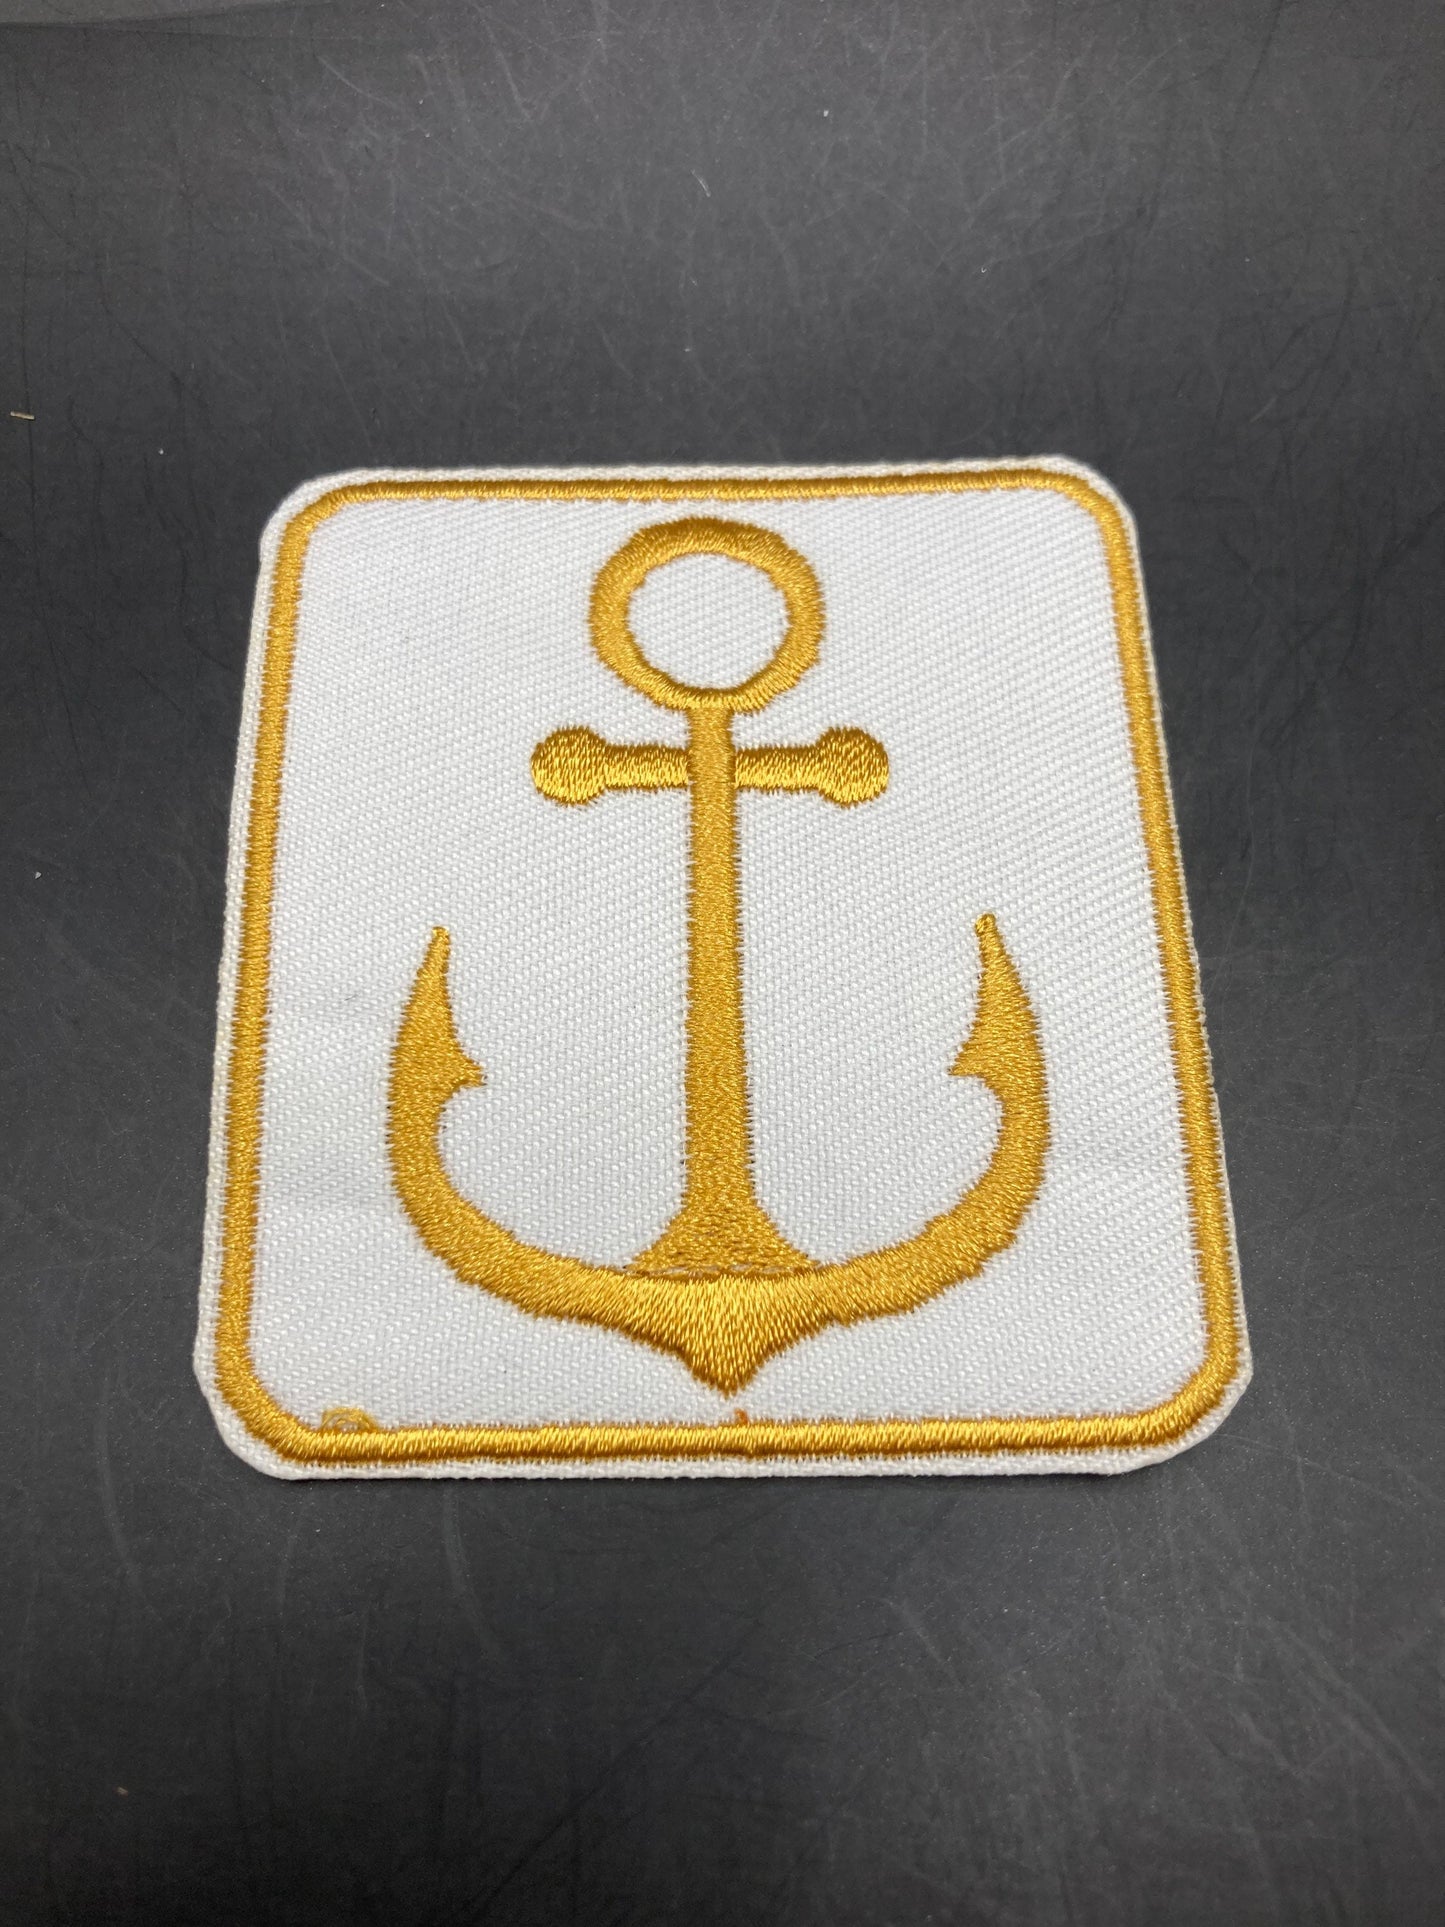 Iron On Anchor Patch appliqué White and Gold nautical